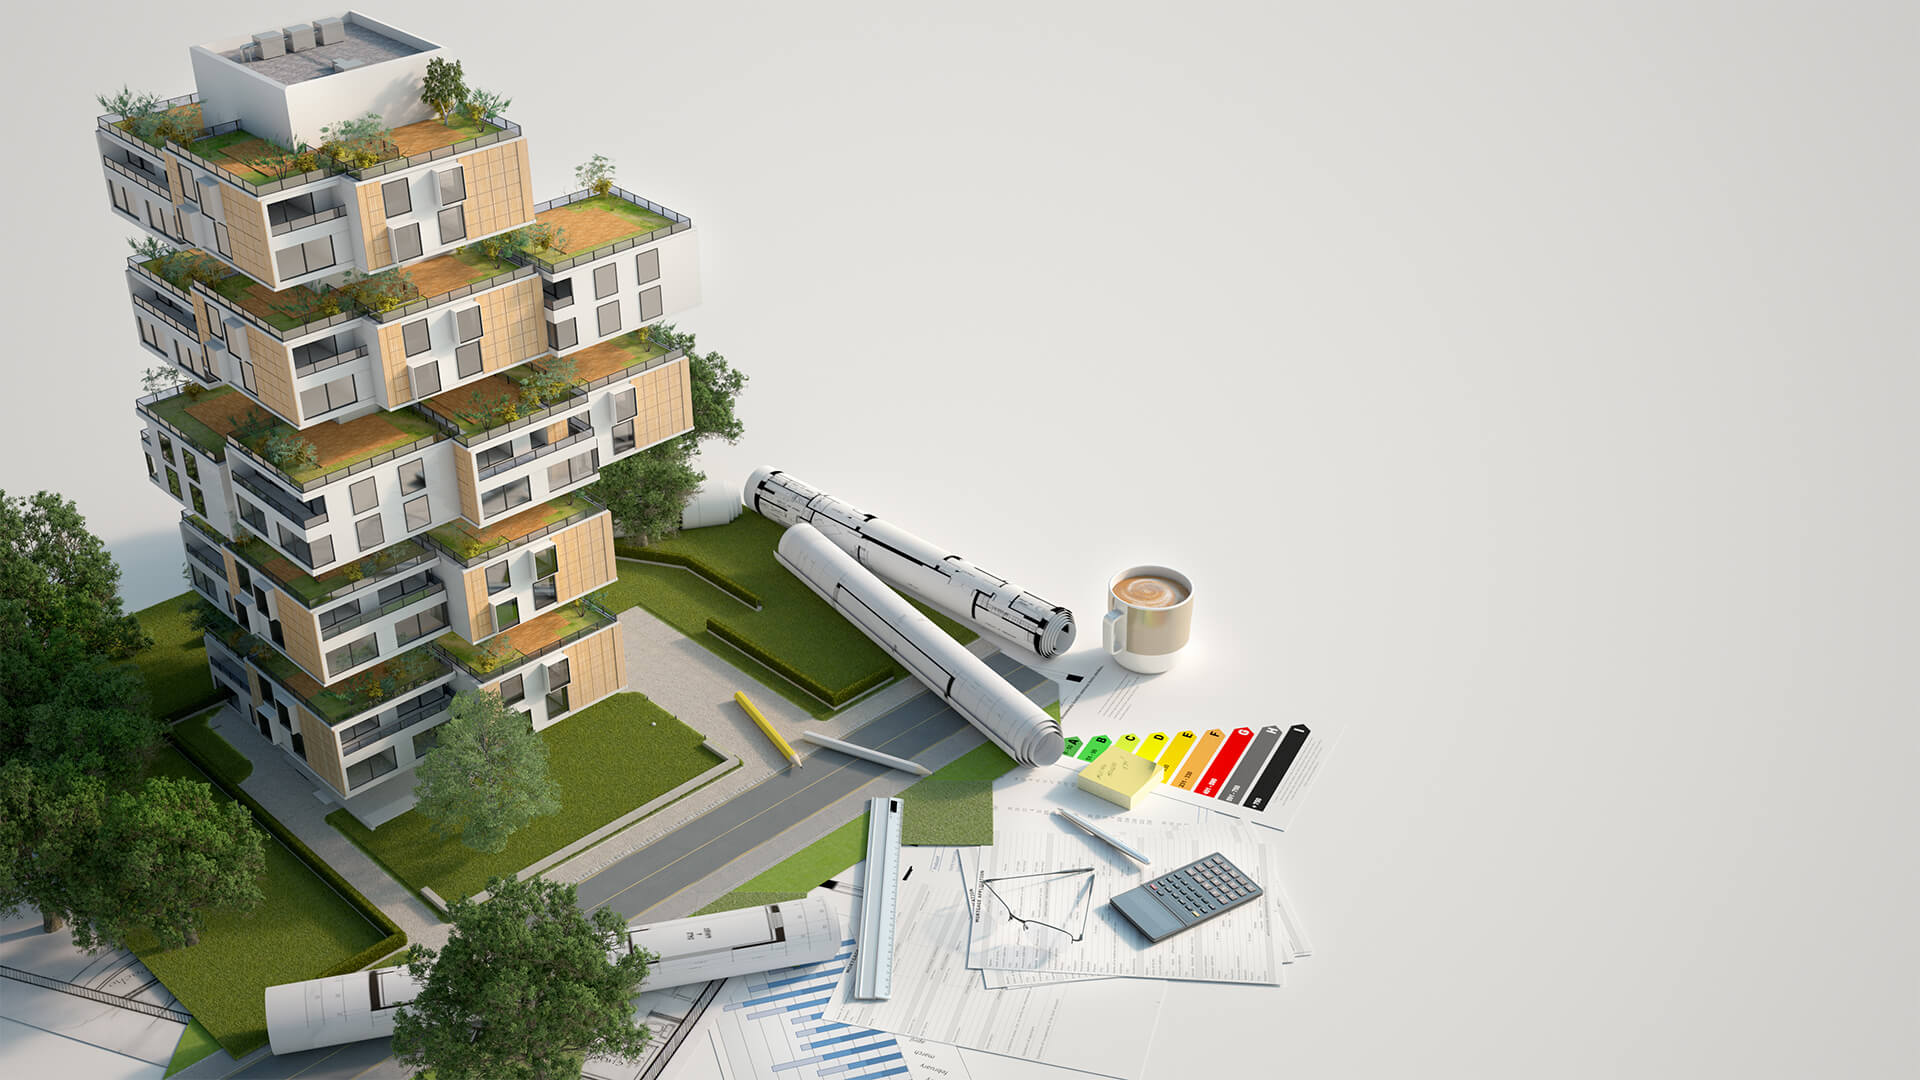 Plans for a sustainable building, with a 3d rendour of the building